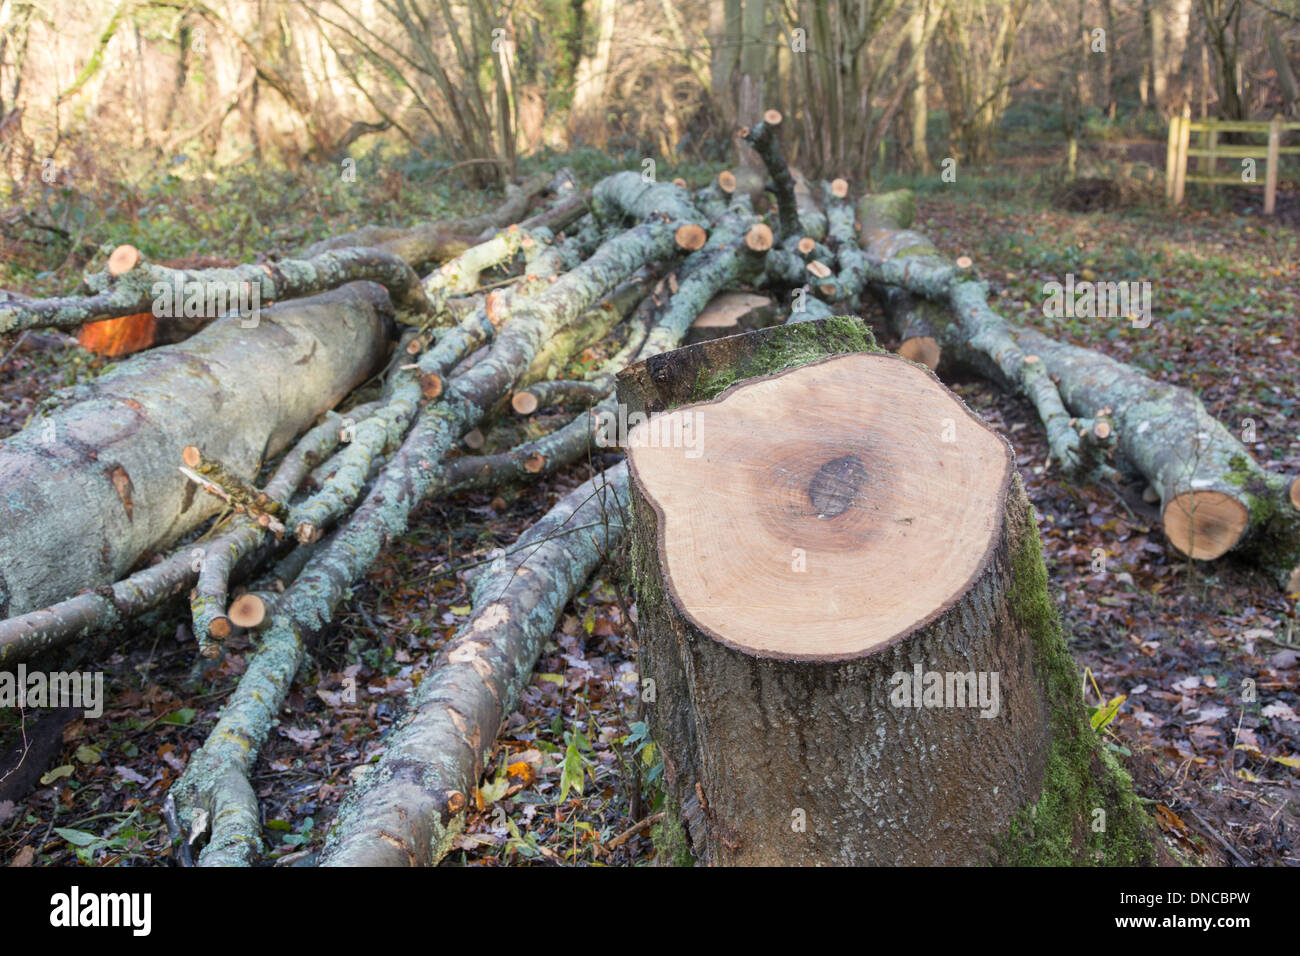 Ash trees felled after being infected by Ash dieback 'Chalara fraxinea' in a British woodland, Worcestershire, England, UK Stock Photo